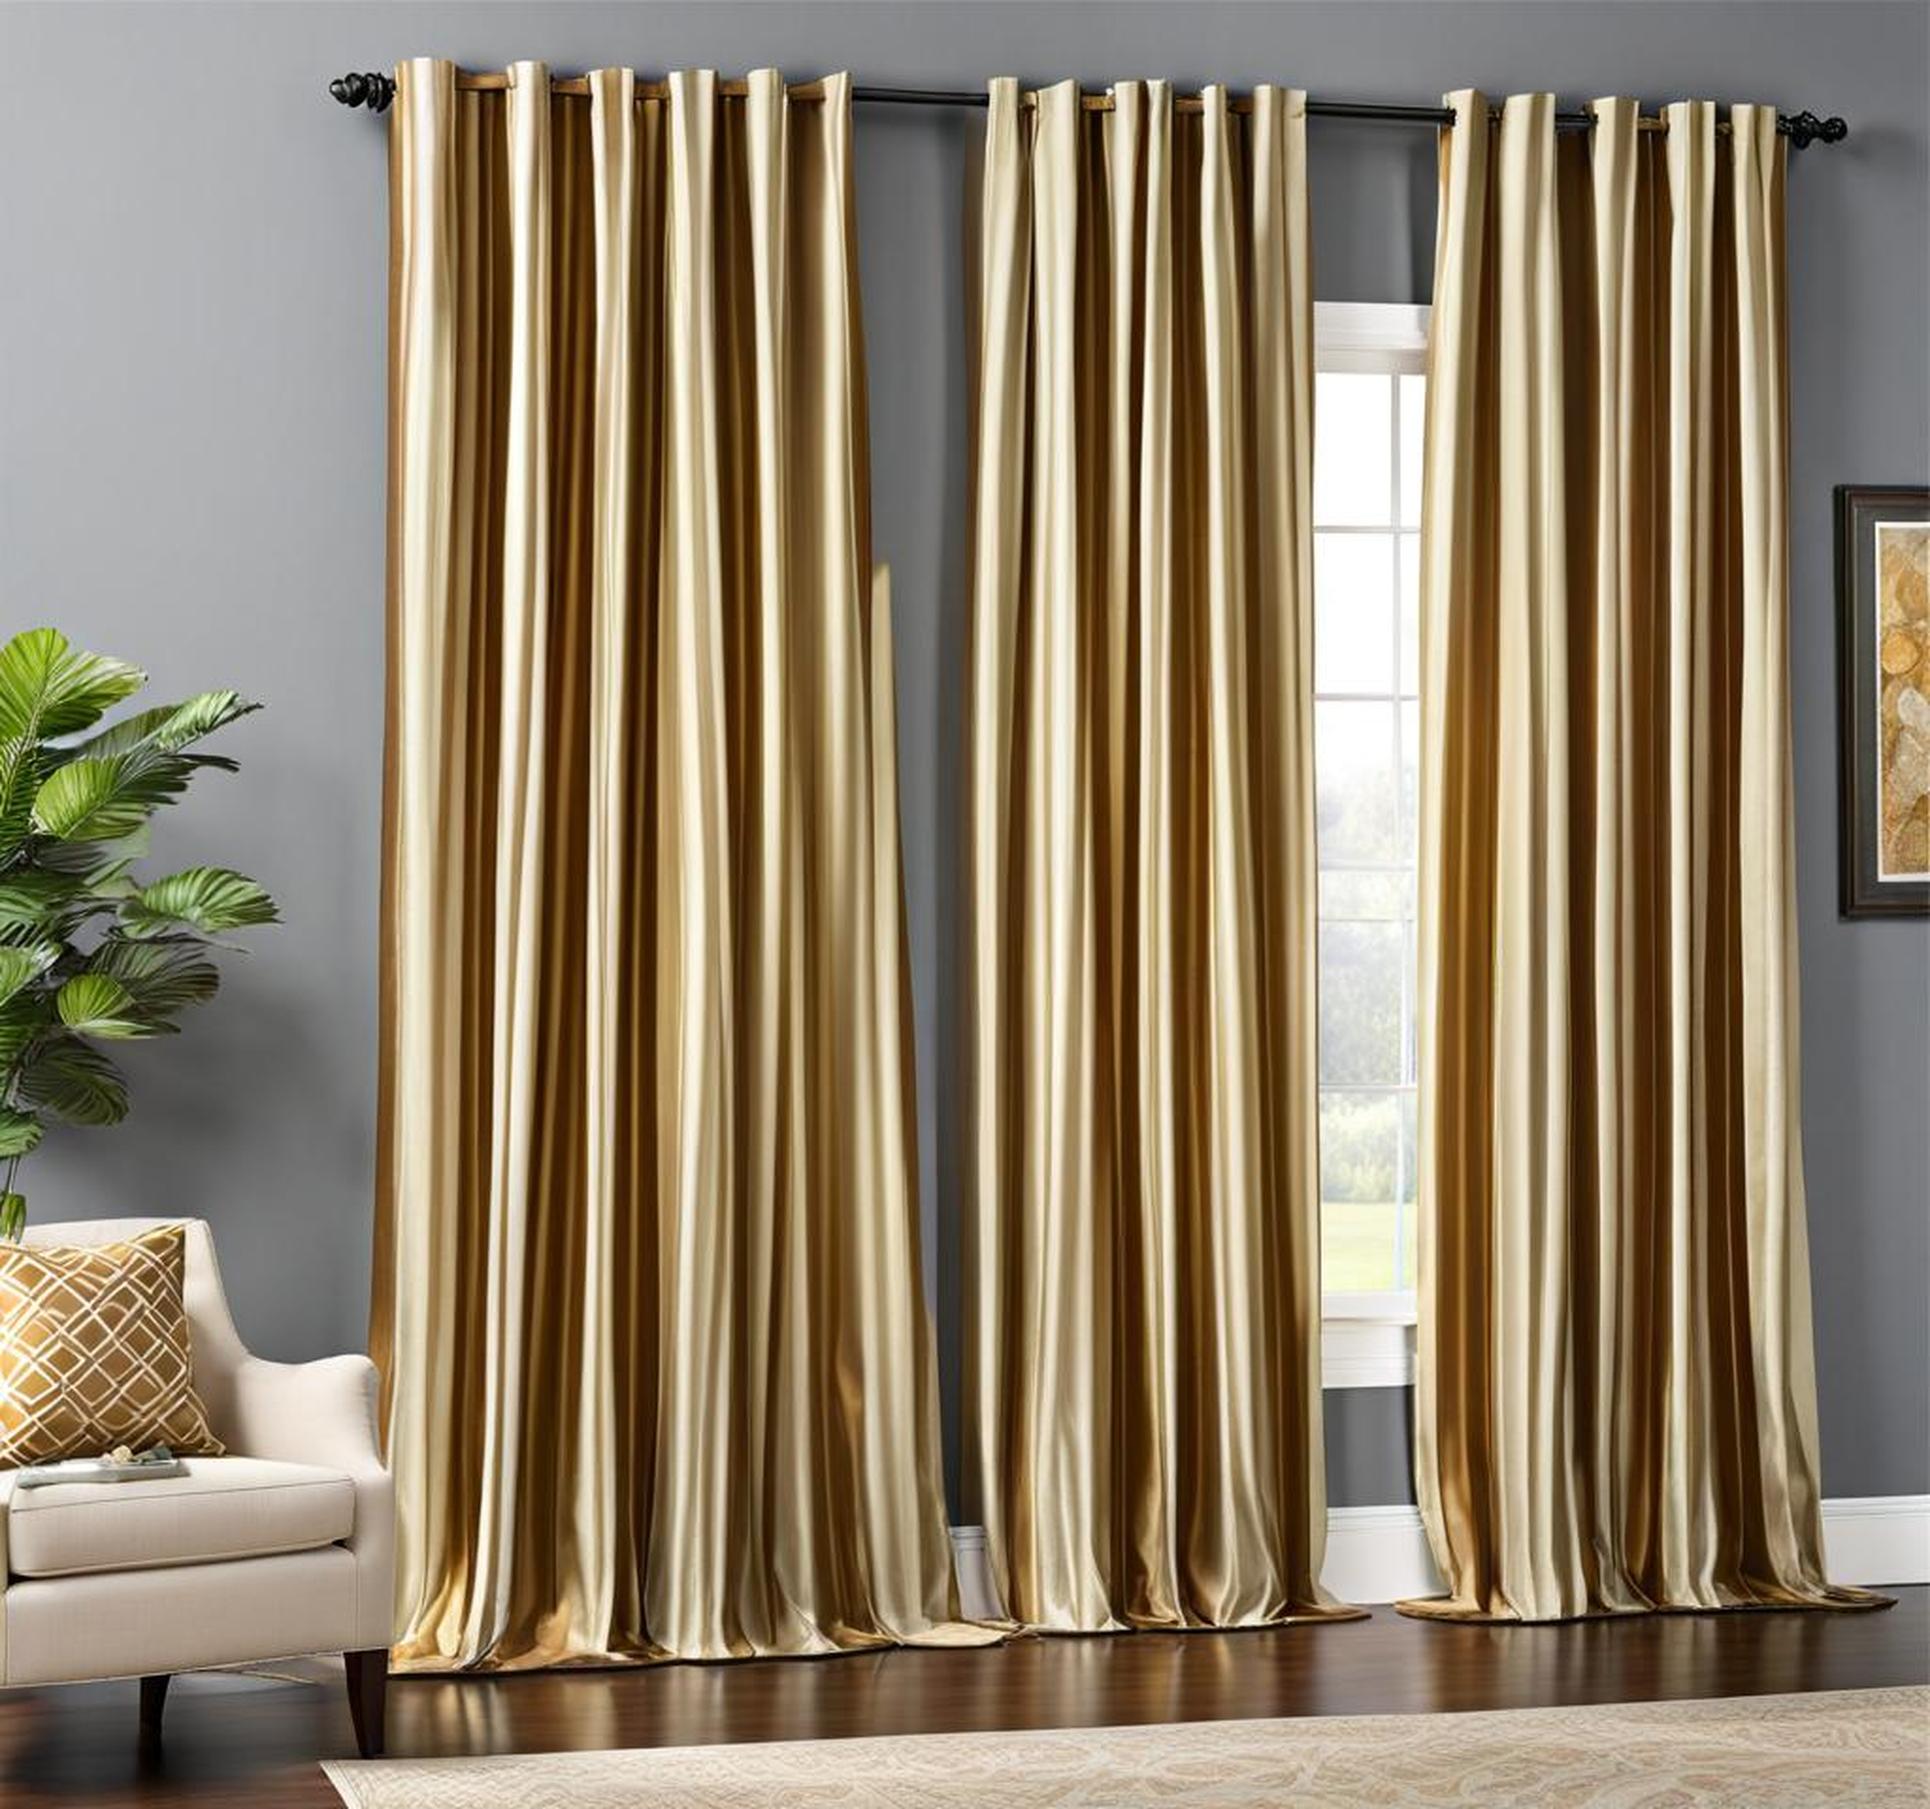 Add a Touch of Luxury with Stunning 96-Inch Long Curtains